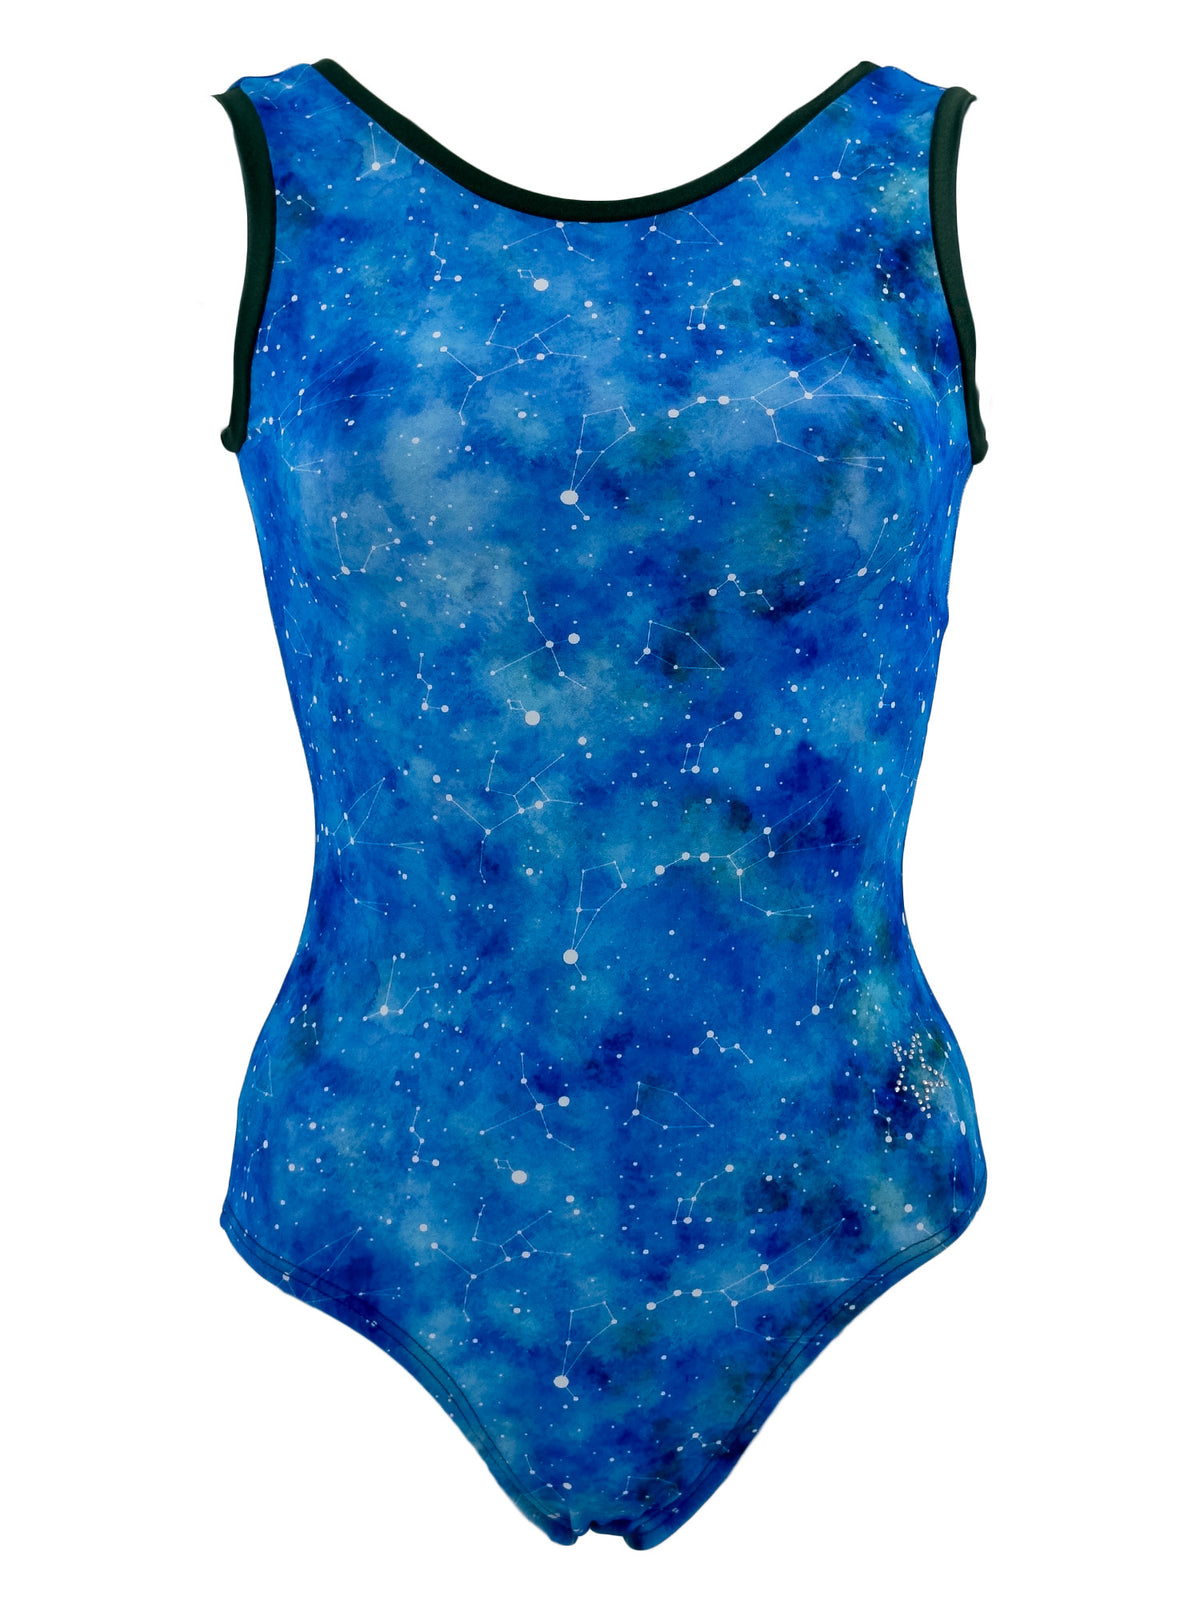 Constellations tank style leotard front view